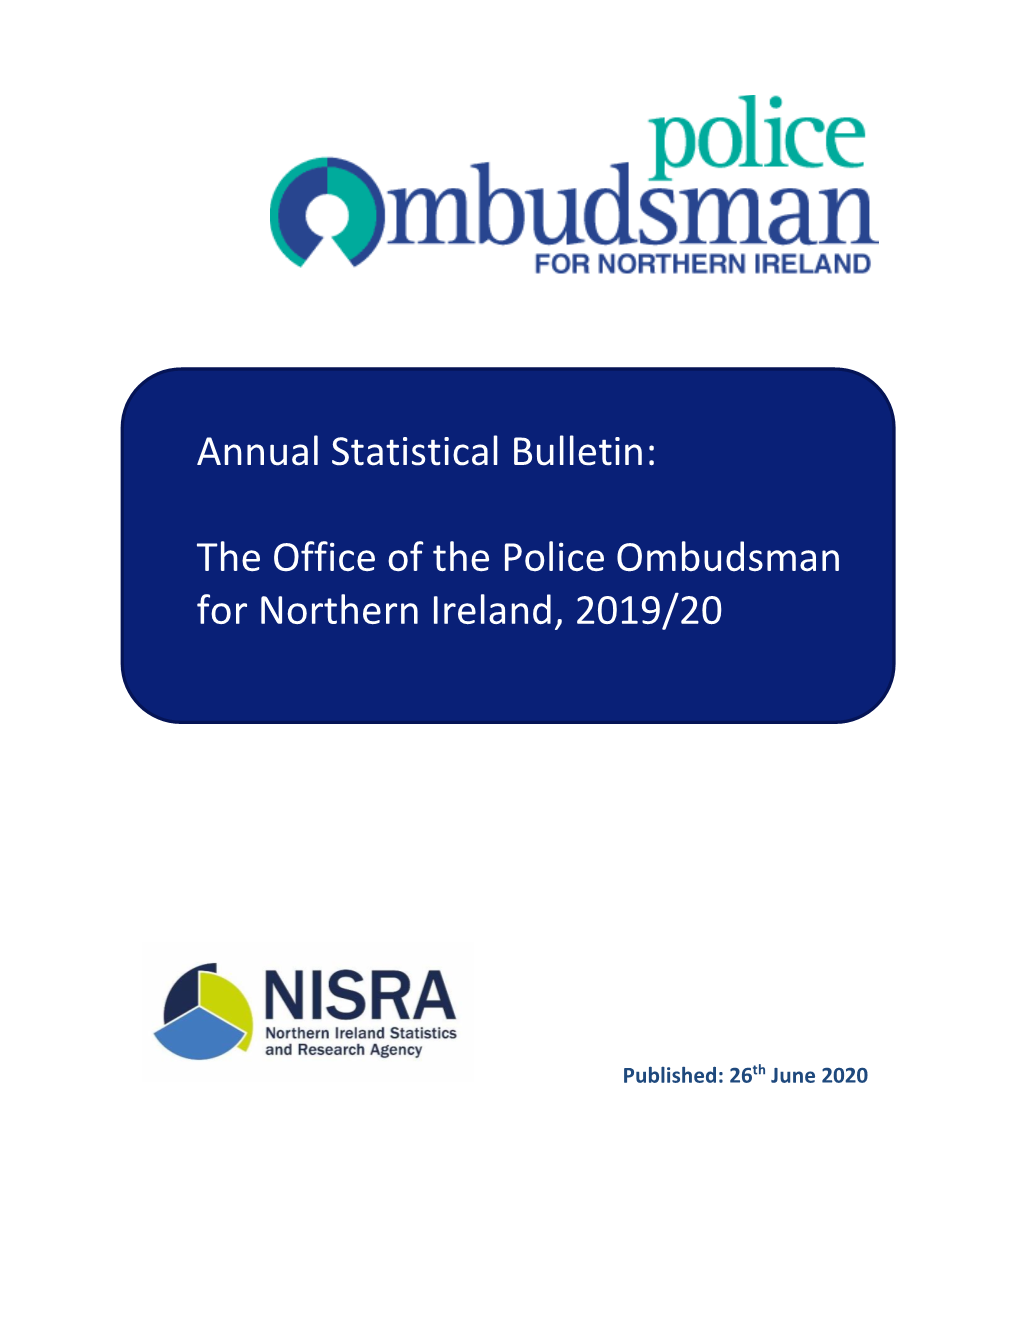 Annual Statistical Bulletin: the Office of the Police Ombudsman For